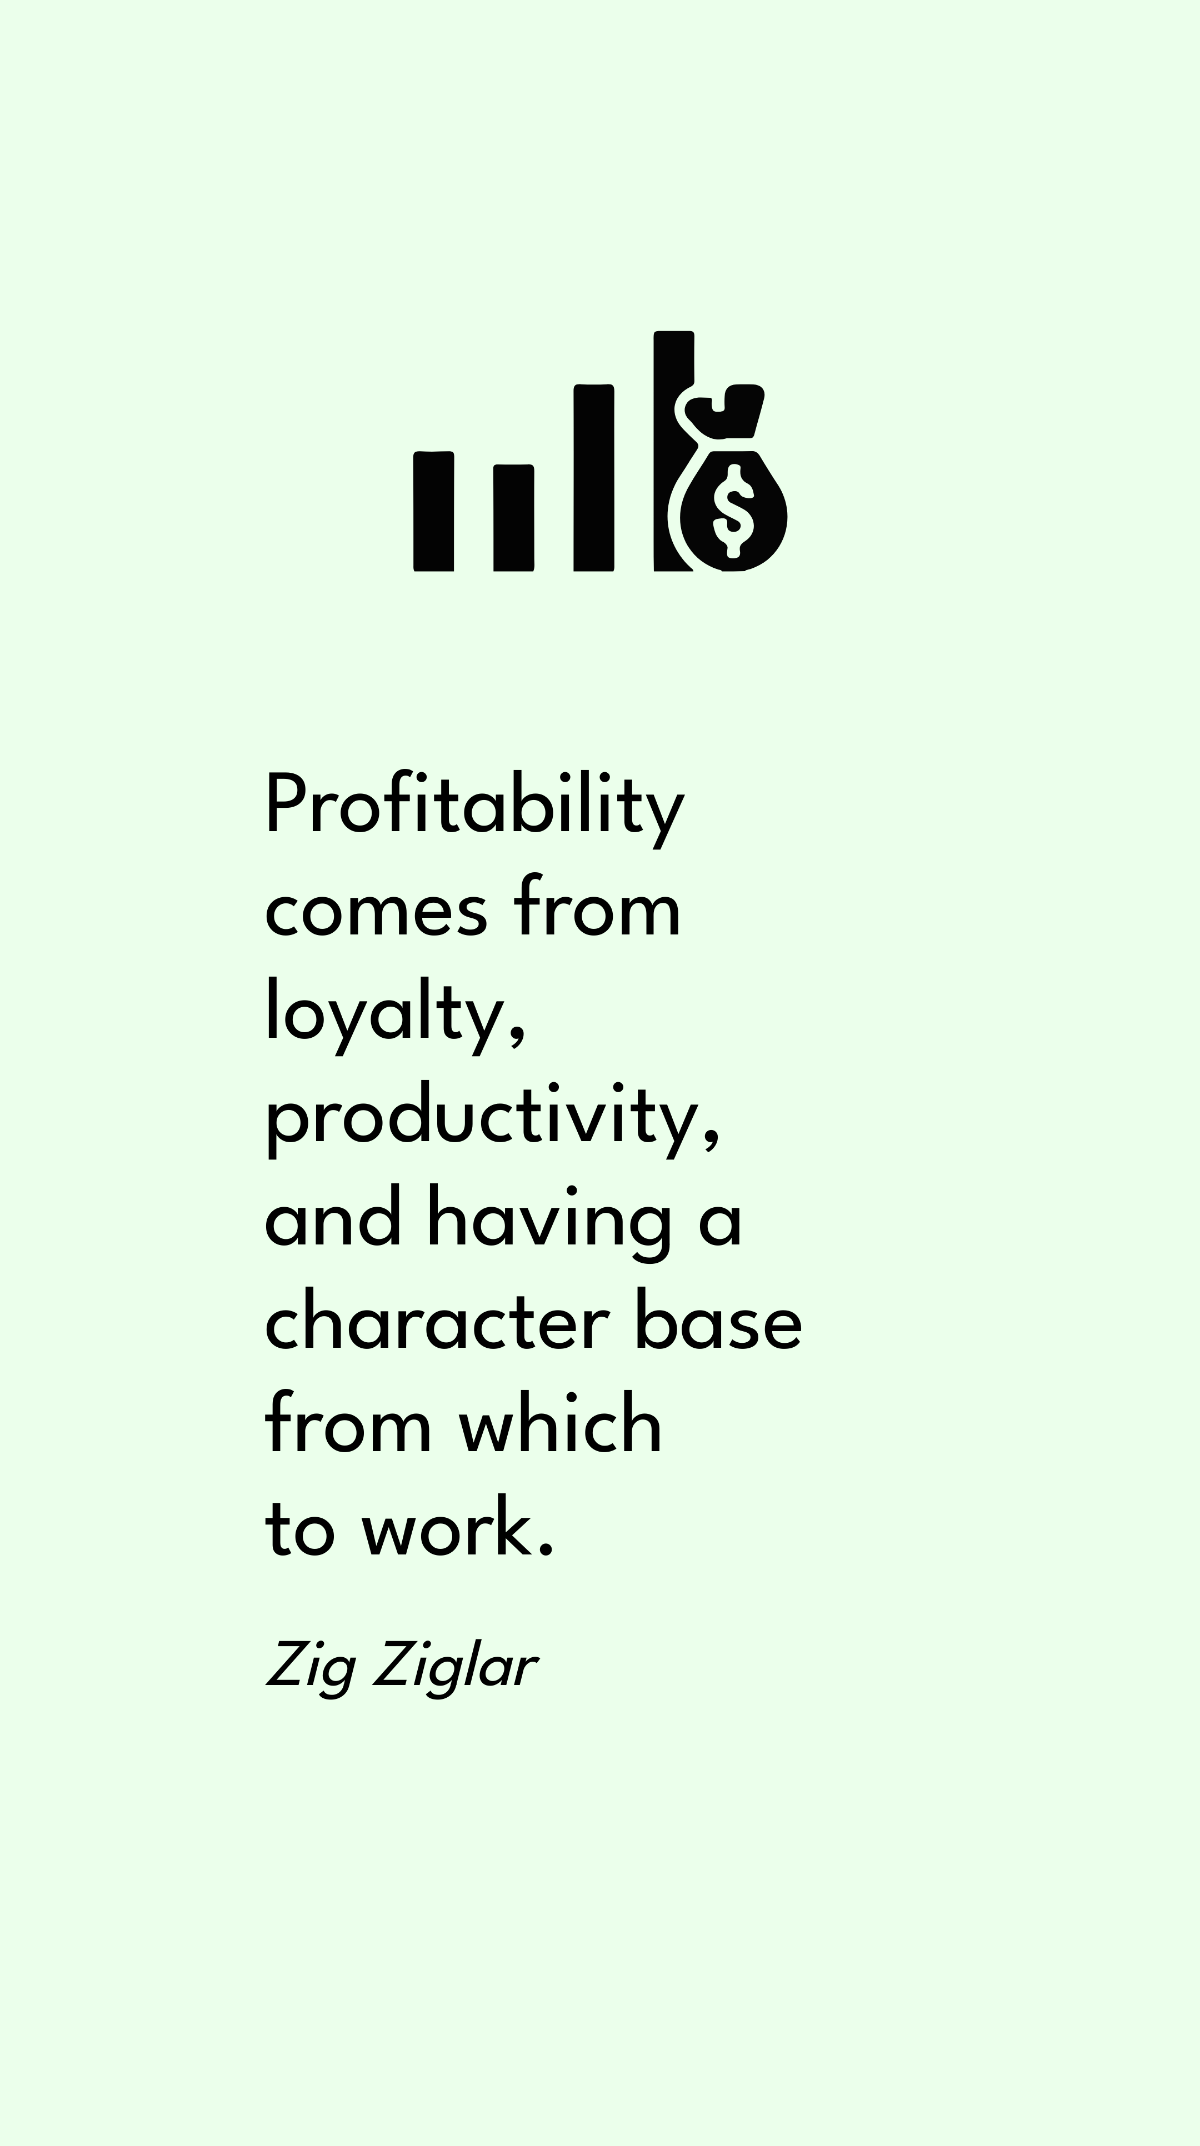 Zig Ziglar - Profitability comes from loyalty, productivity, and having a character base from which to work.